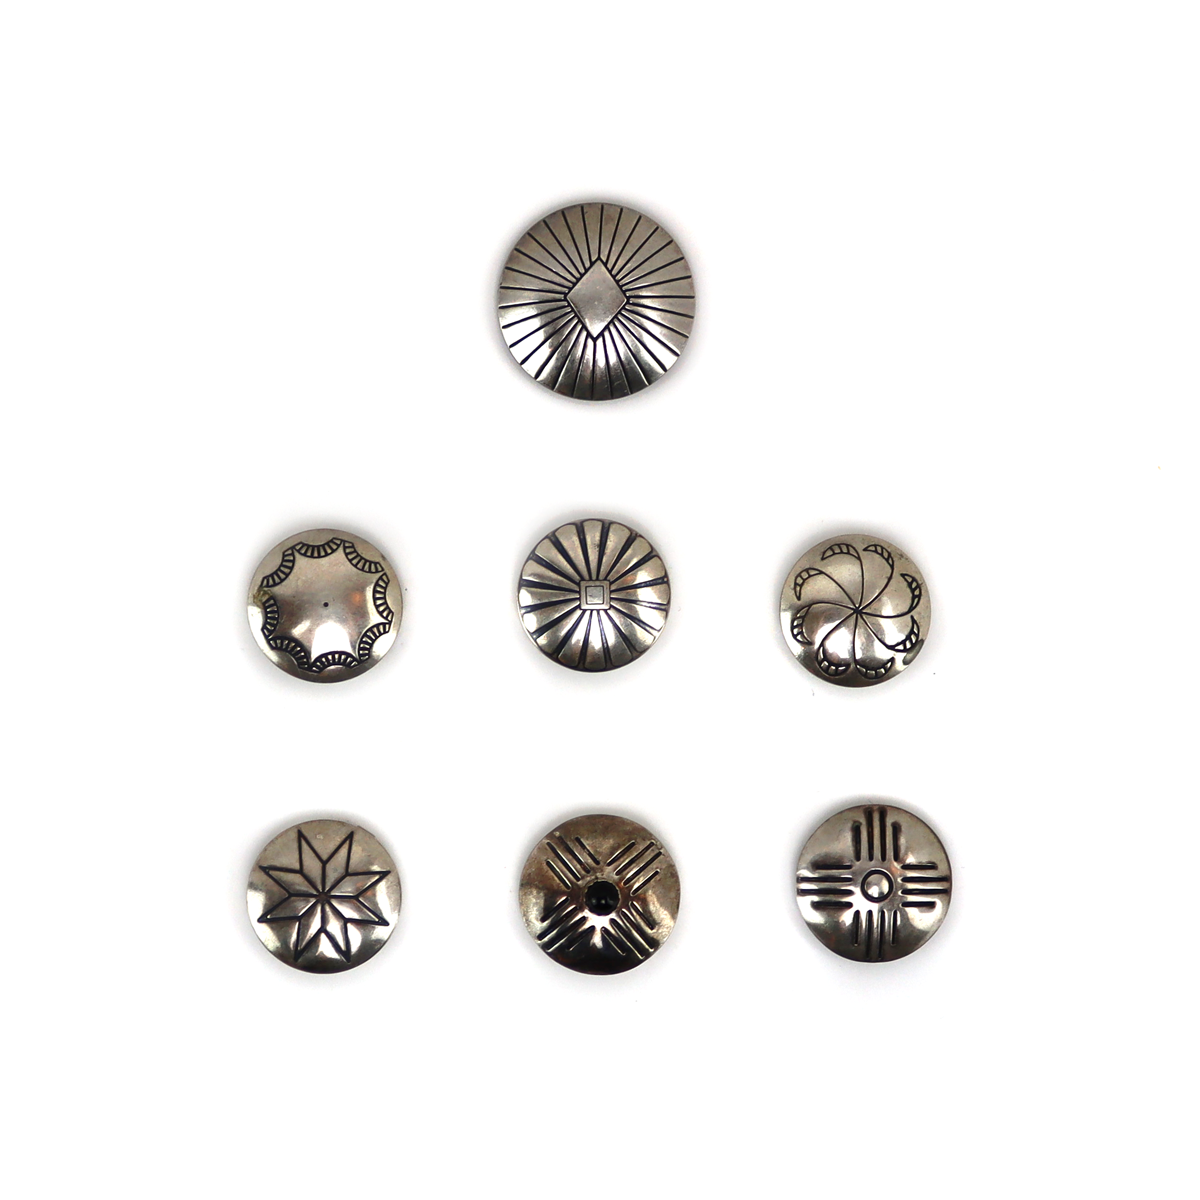 Set of 7 Navajo Silver Buttons c. 1950-60s